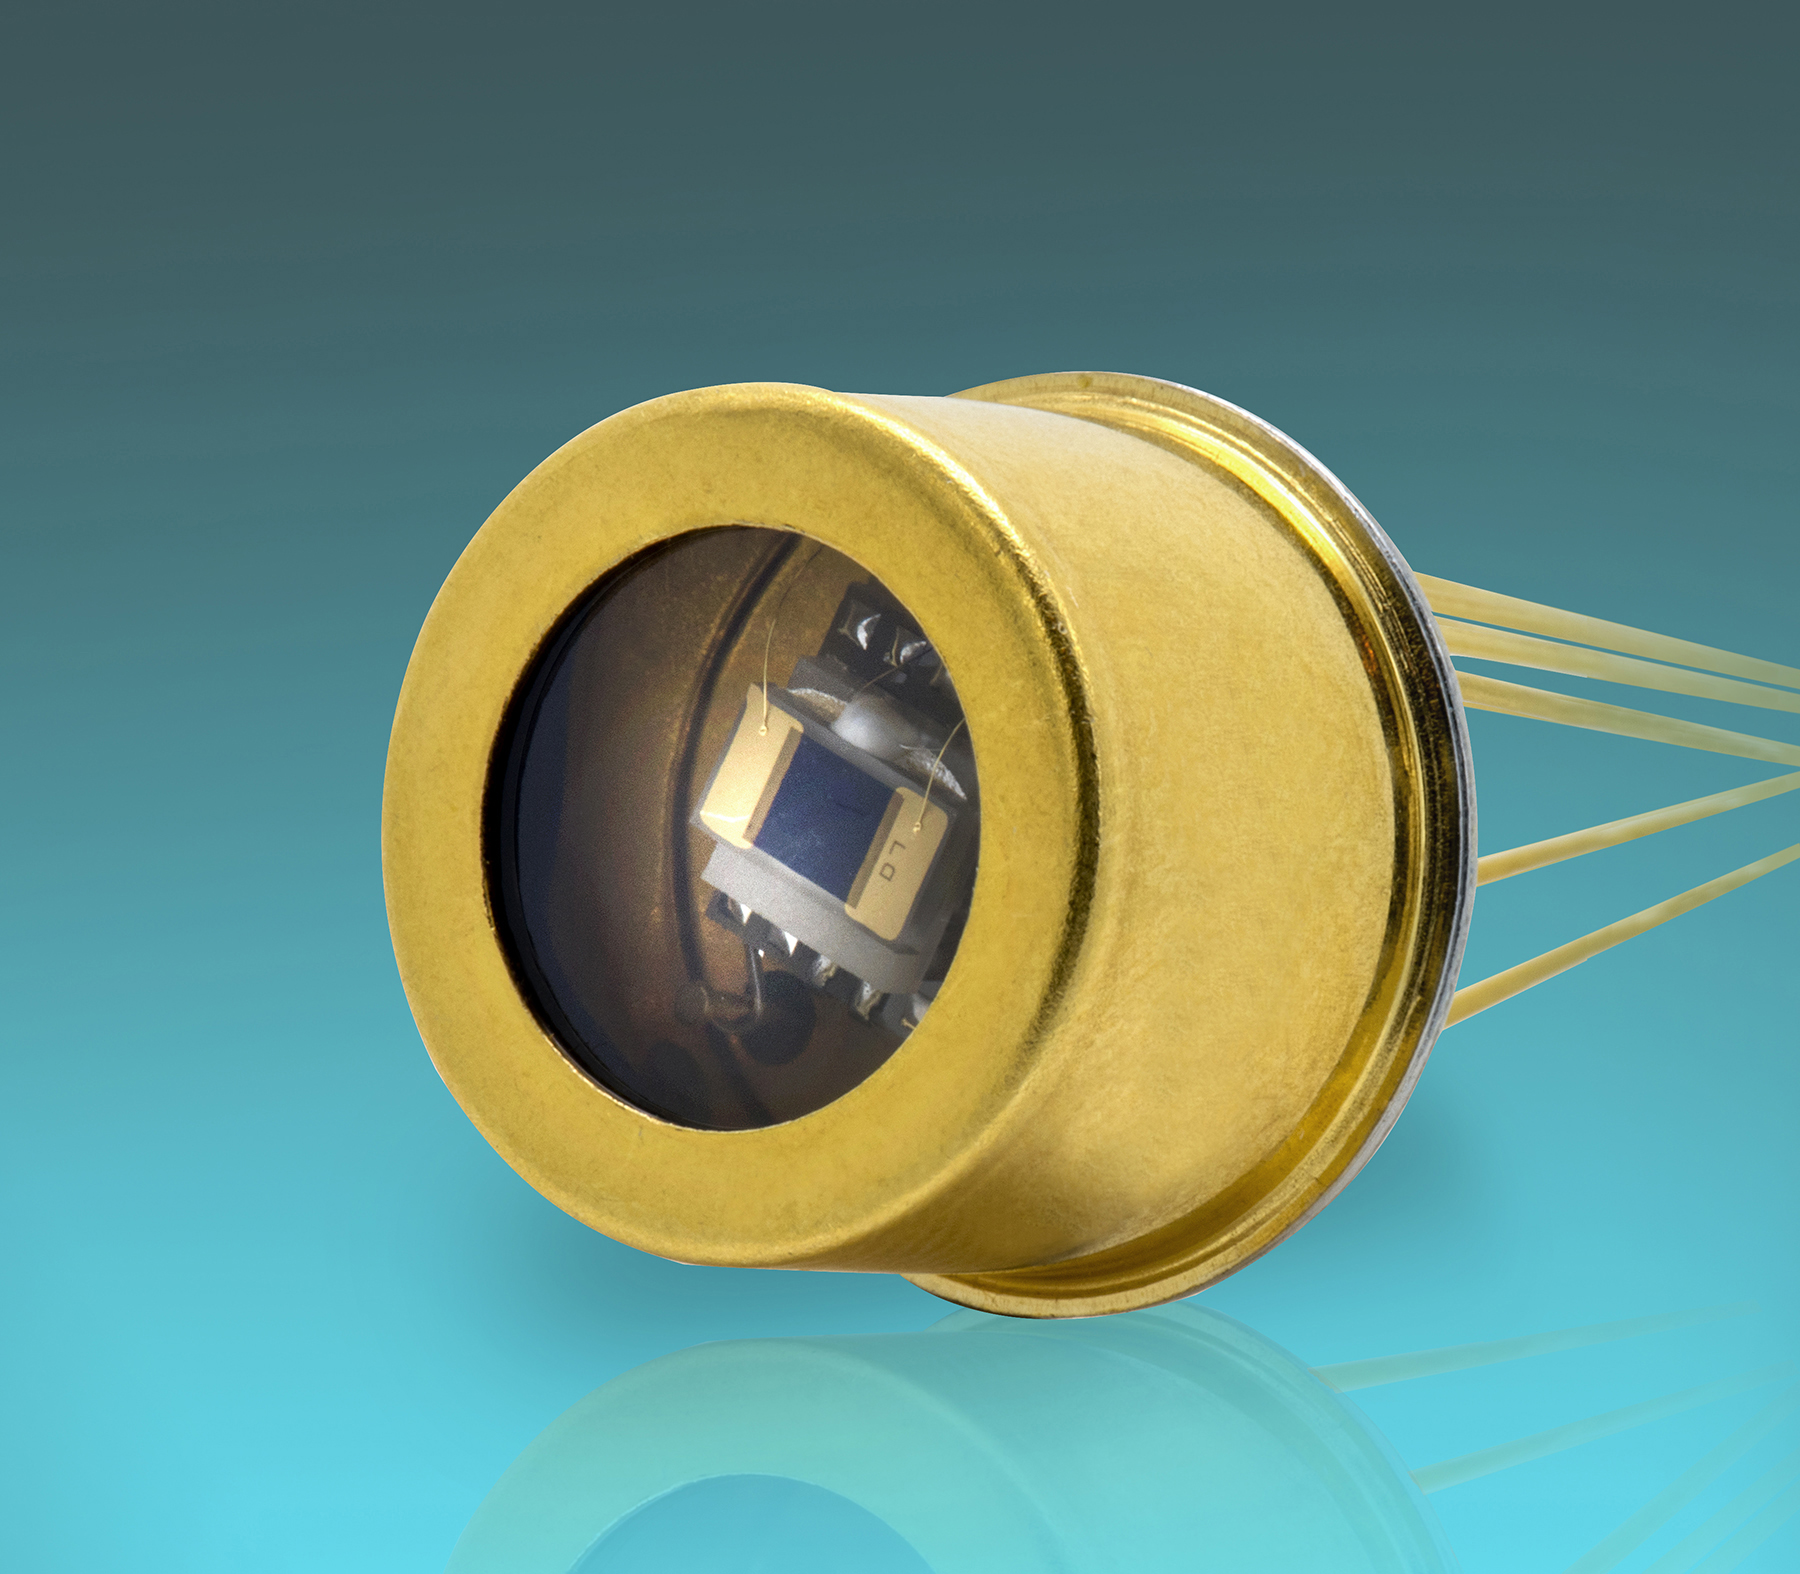 Opto Diode Introduces Two-Stage Cooled Mid-Infrared Detector